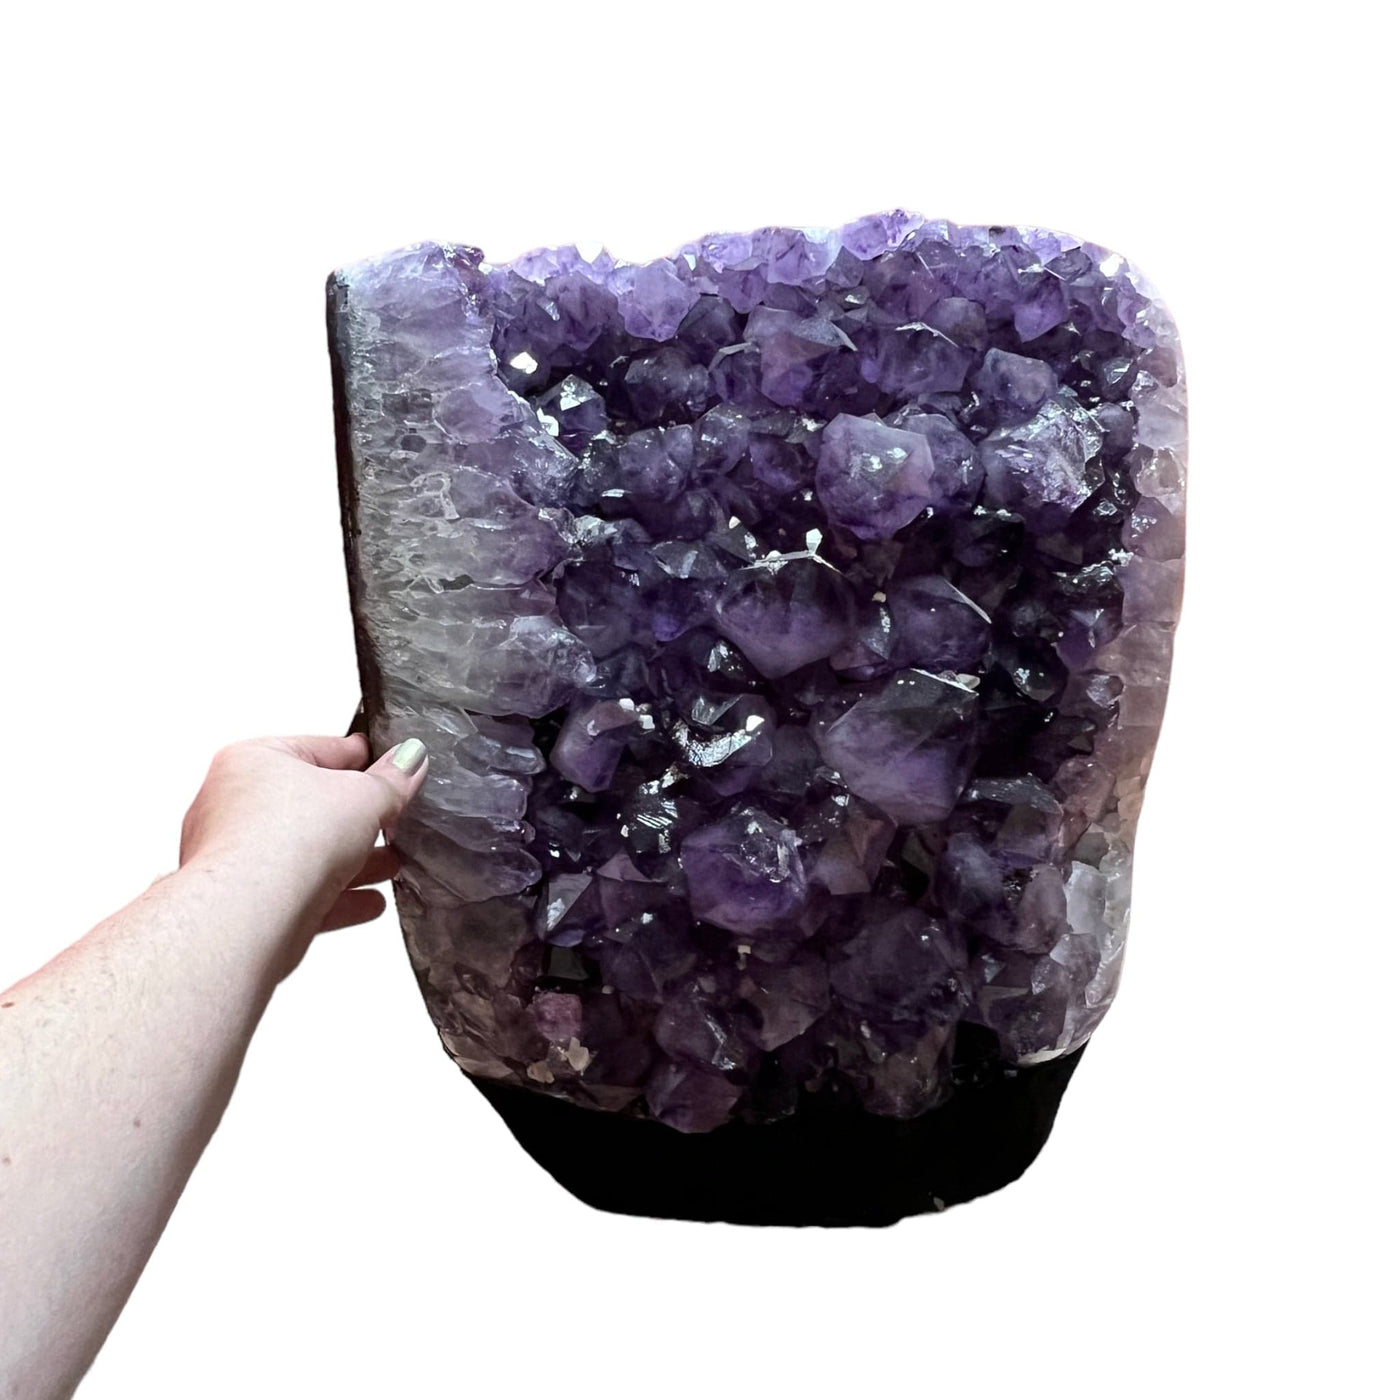 Amethyst Crystal Cluster Cut Base with a hand for size reference